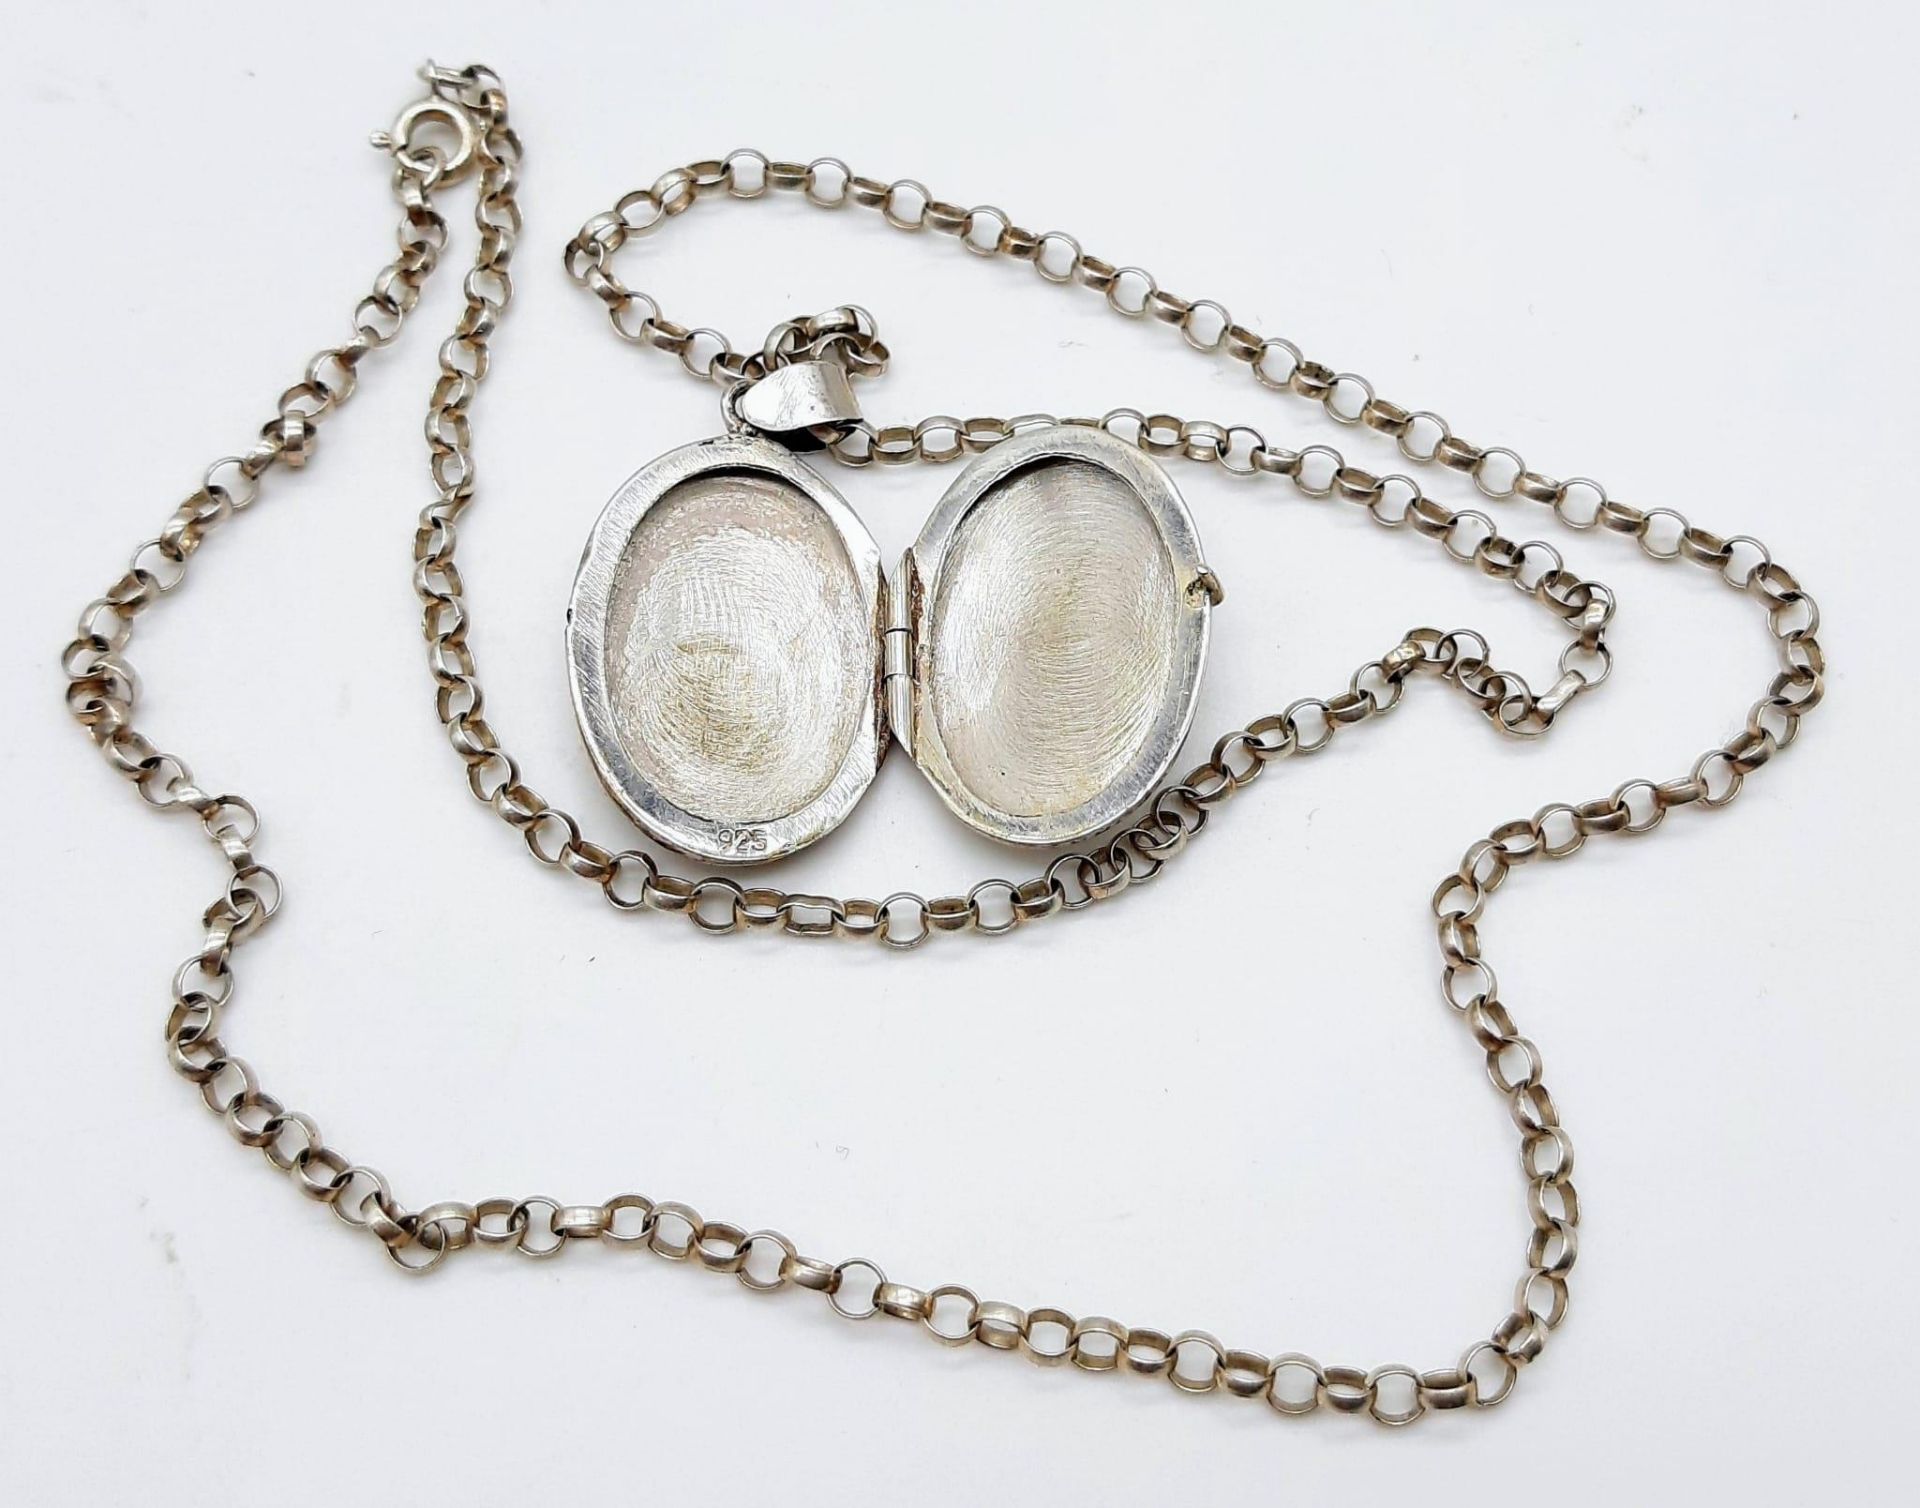 Collection of Sterling Silver Jewellery. Featuring an antique locket on chain (50cm), a stunning